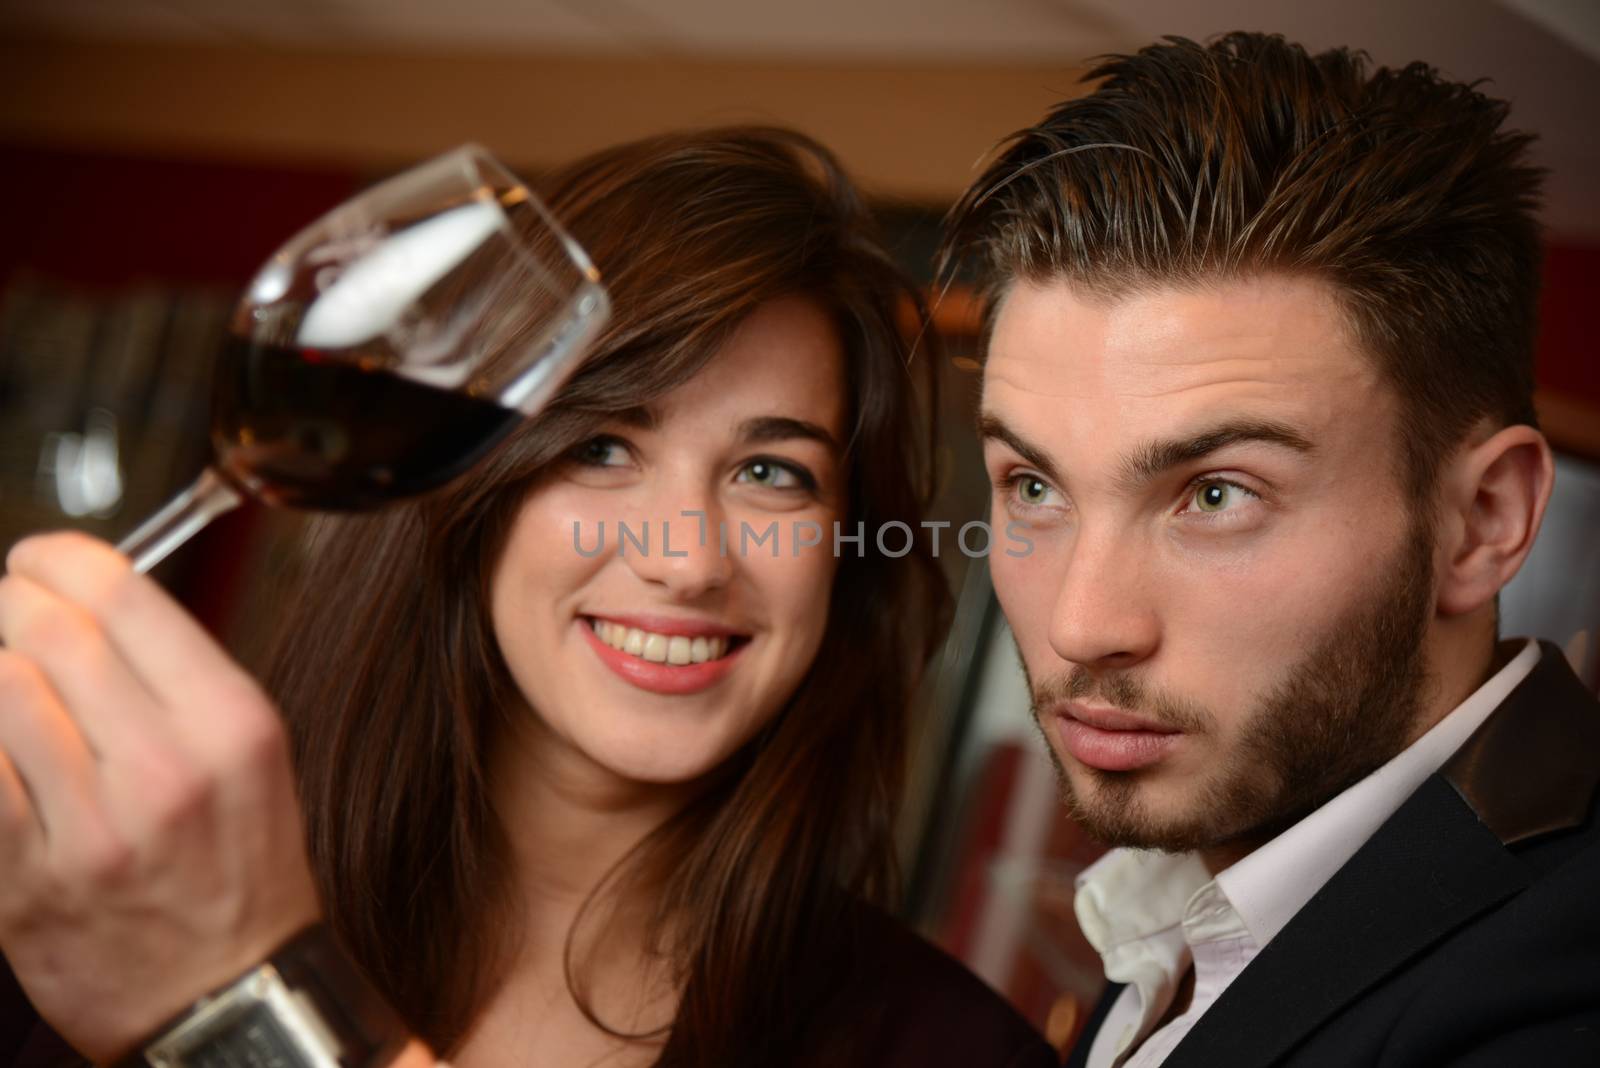 Young couples with redwine glasses at celebration or party by FreeProd